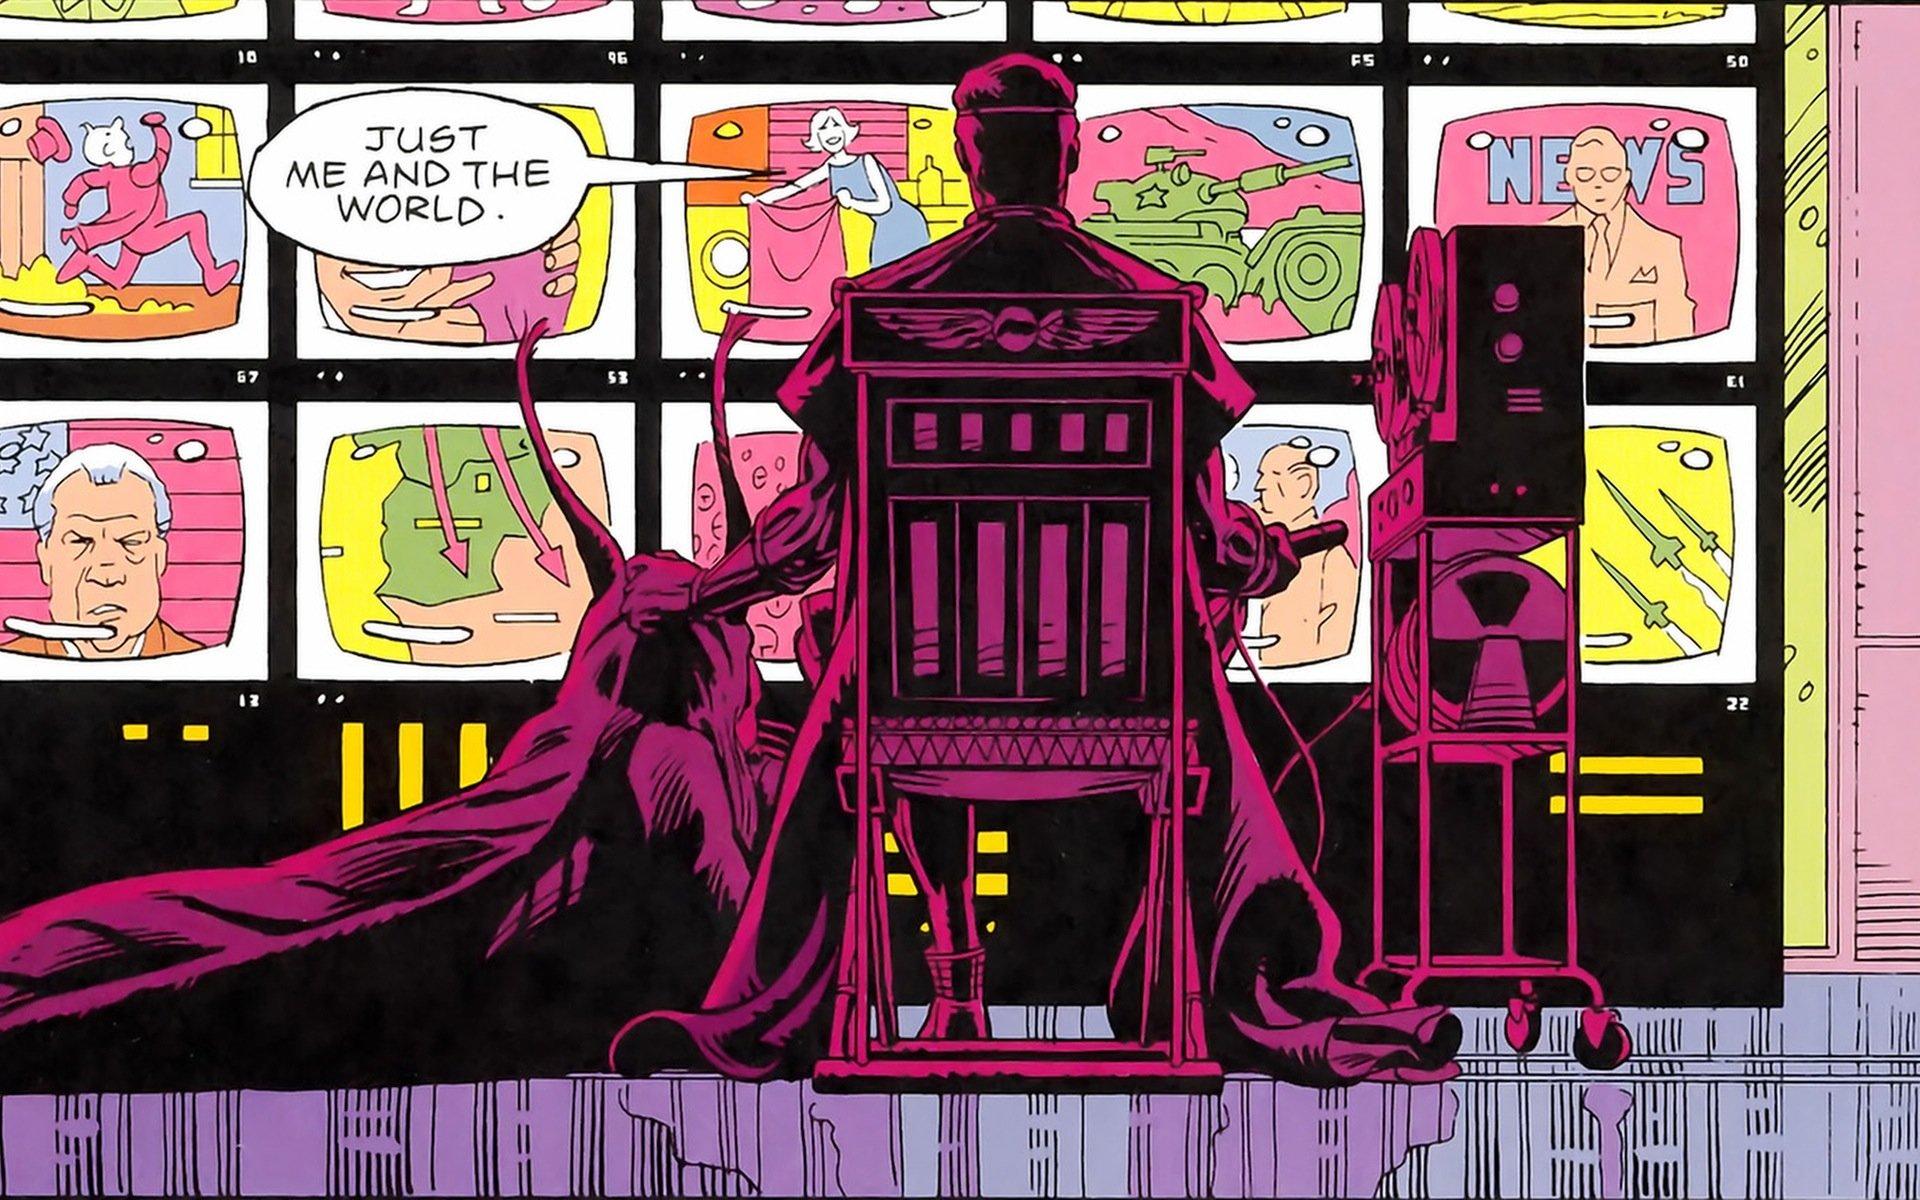 Be prepared: Jeremy Irons may play Ozymandias in HBO's Watchmen